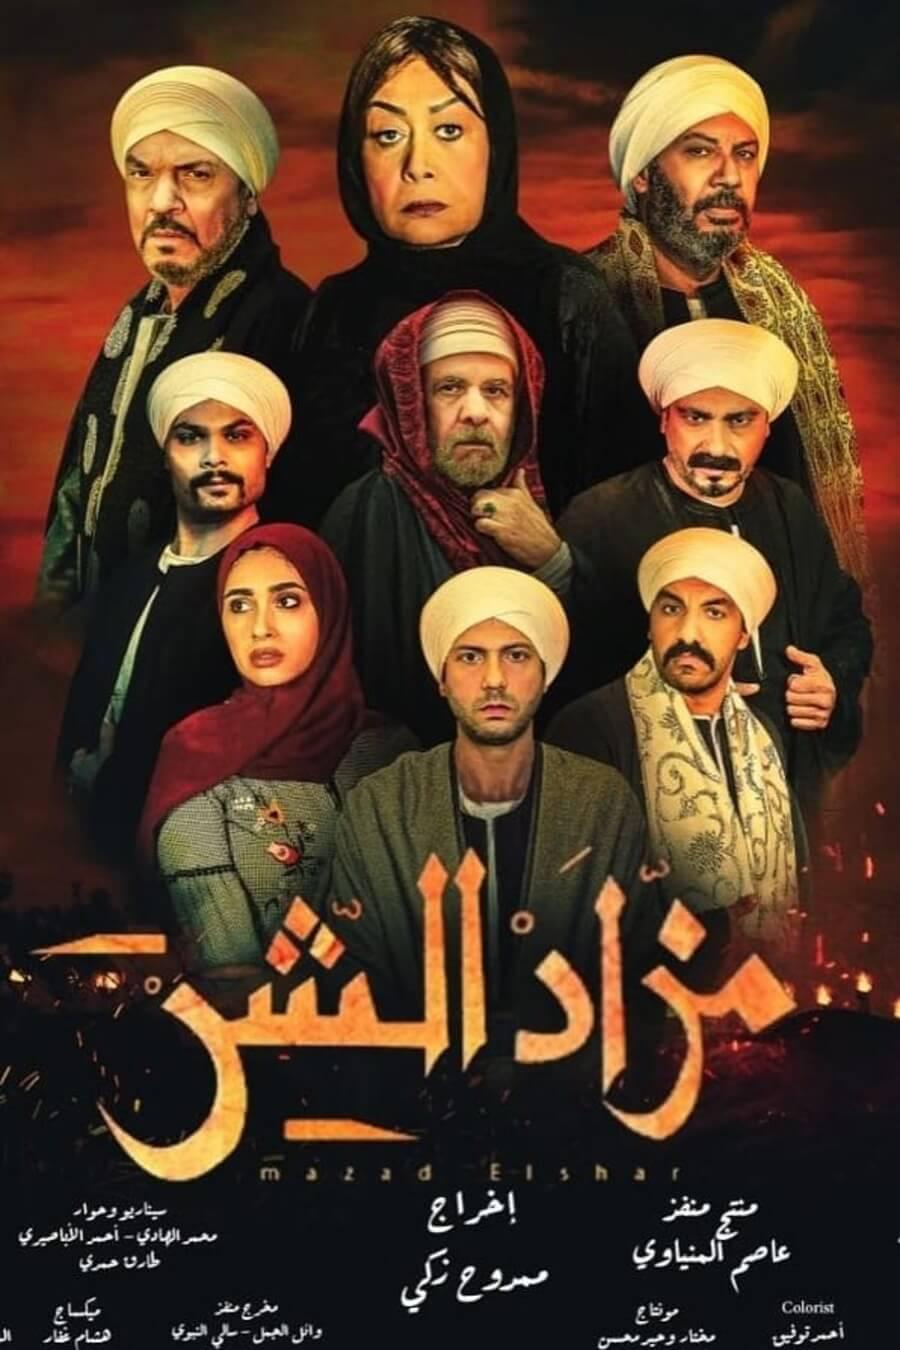 TV ratings for Mazad El Shar (مزاد الشر) in Mexico. TOD TV series